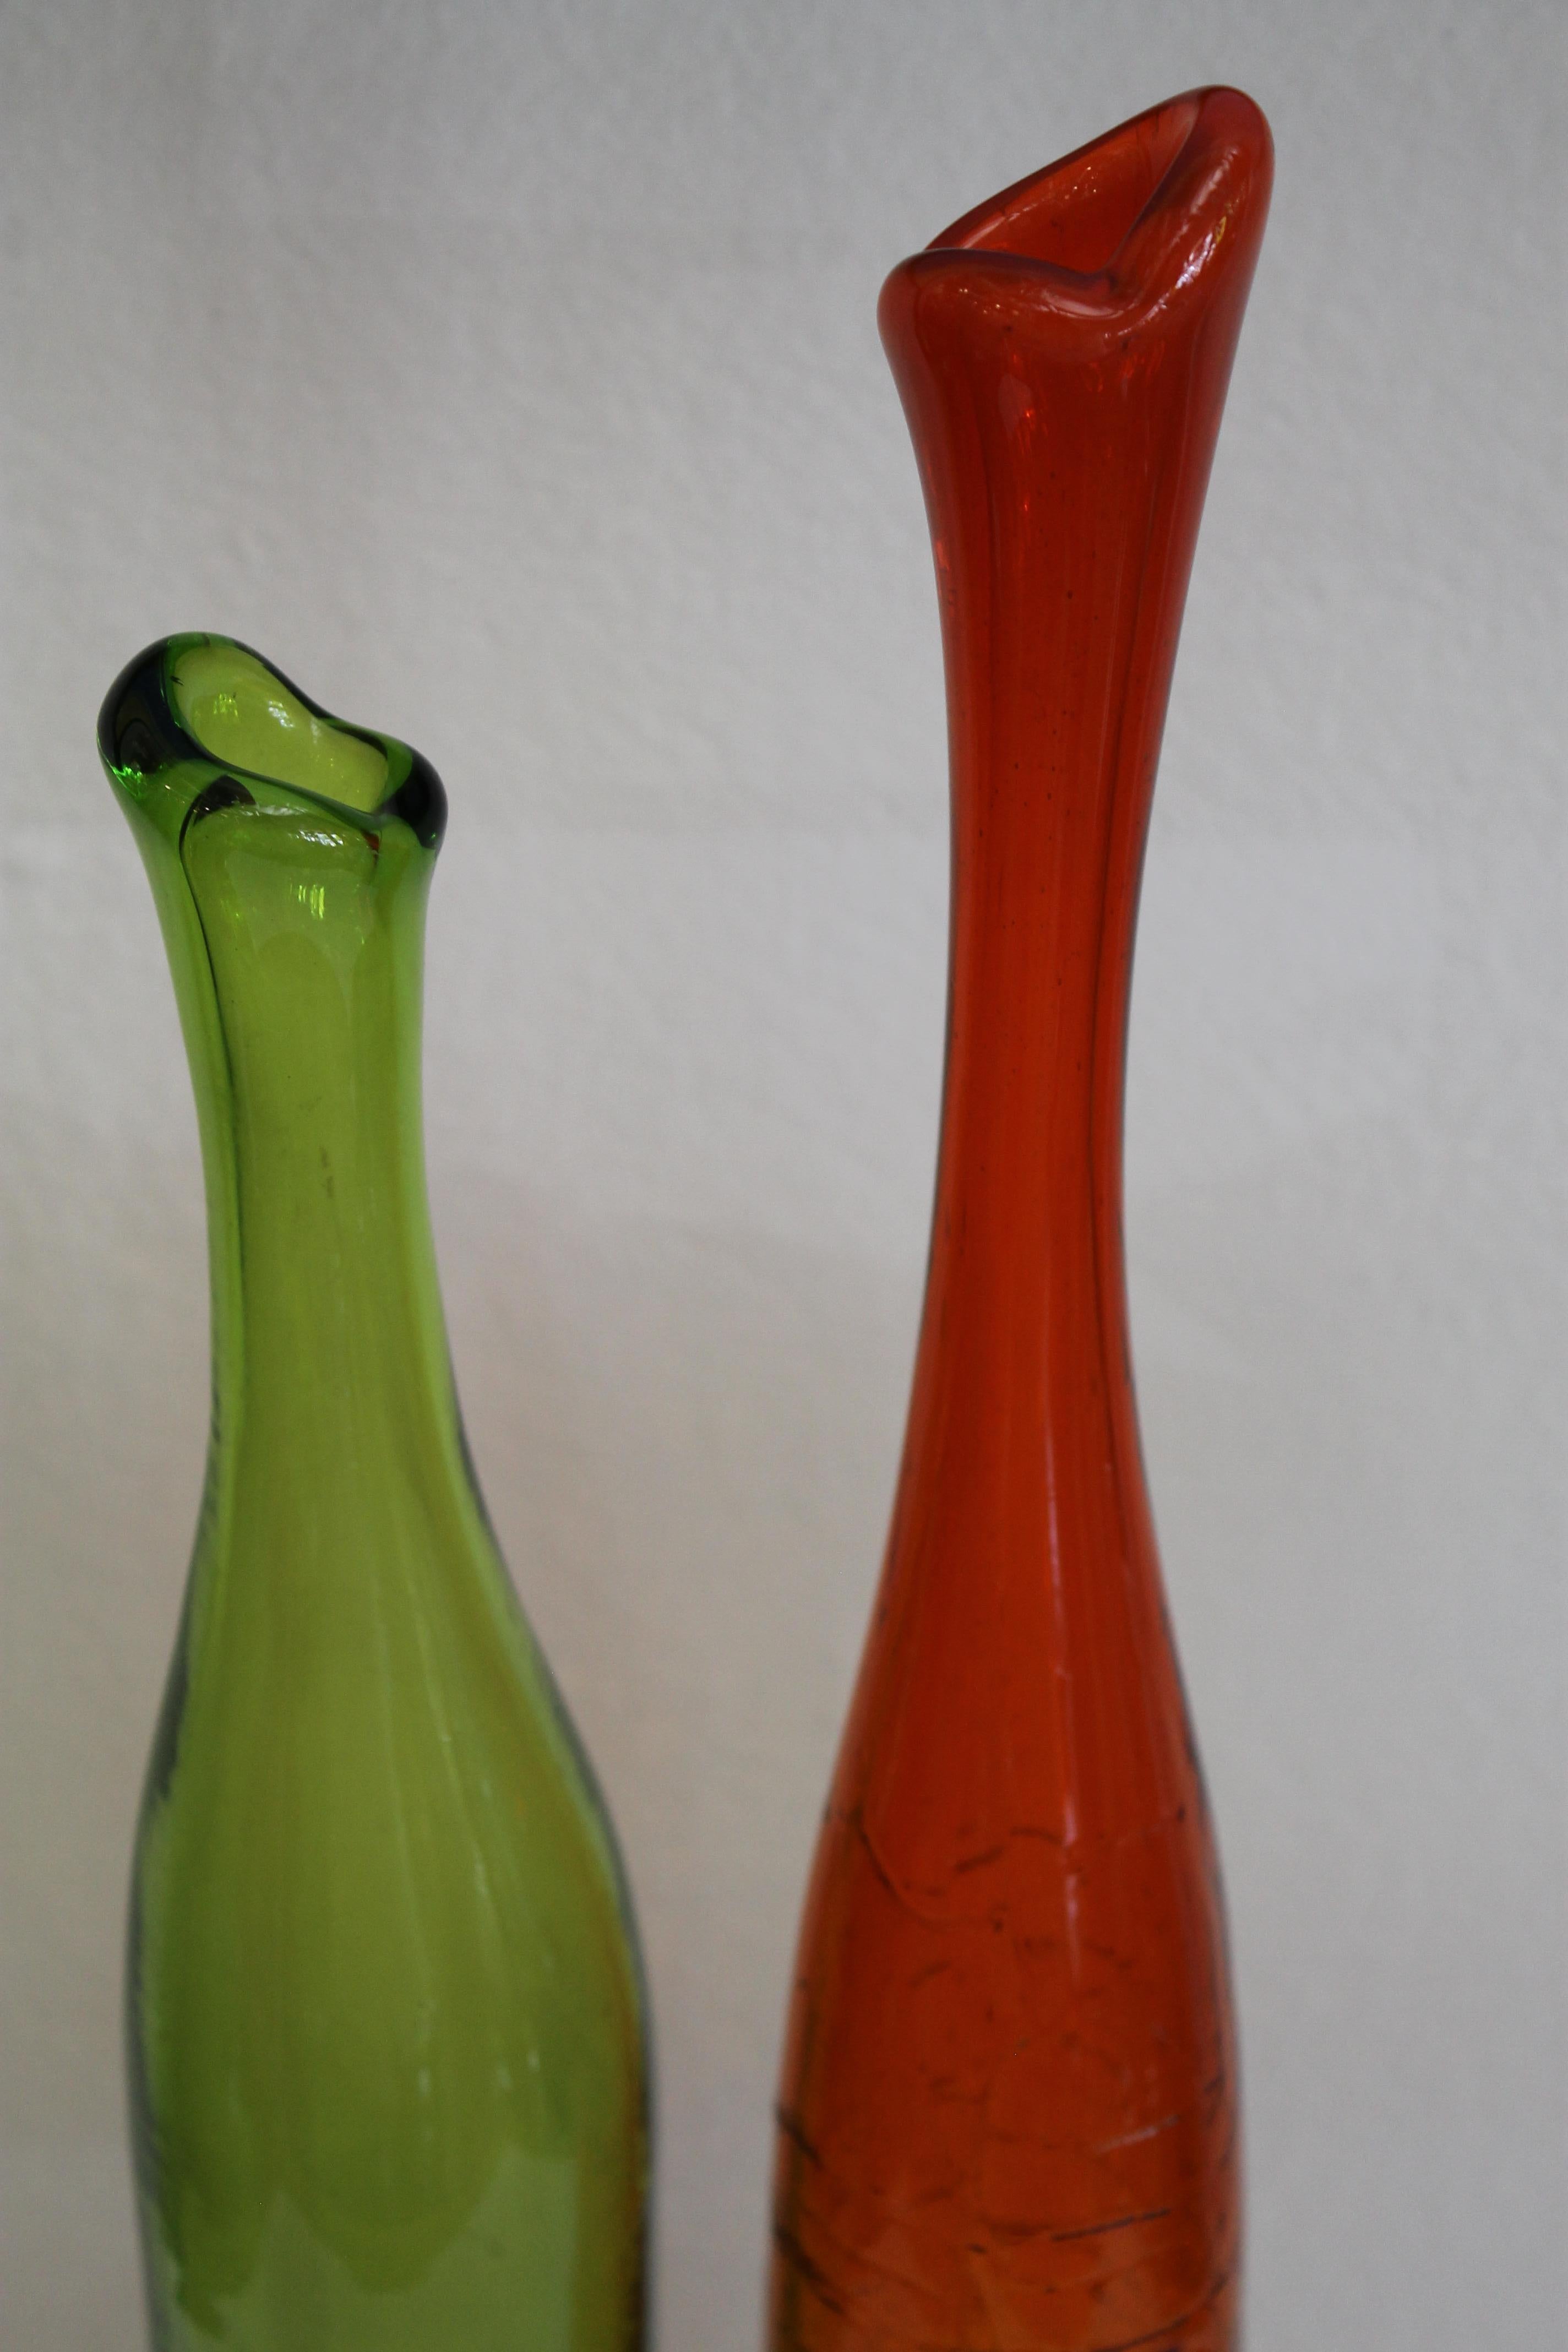 Pair of Joel Myers colored glass vases, model no. 6427, 1960s. Manufactured by Blenko. The tallest vase is 24.25